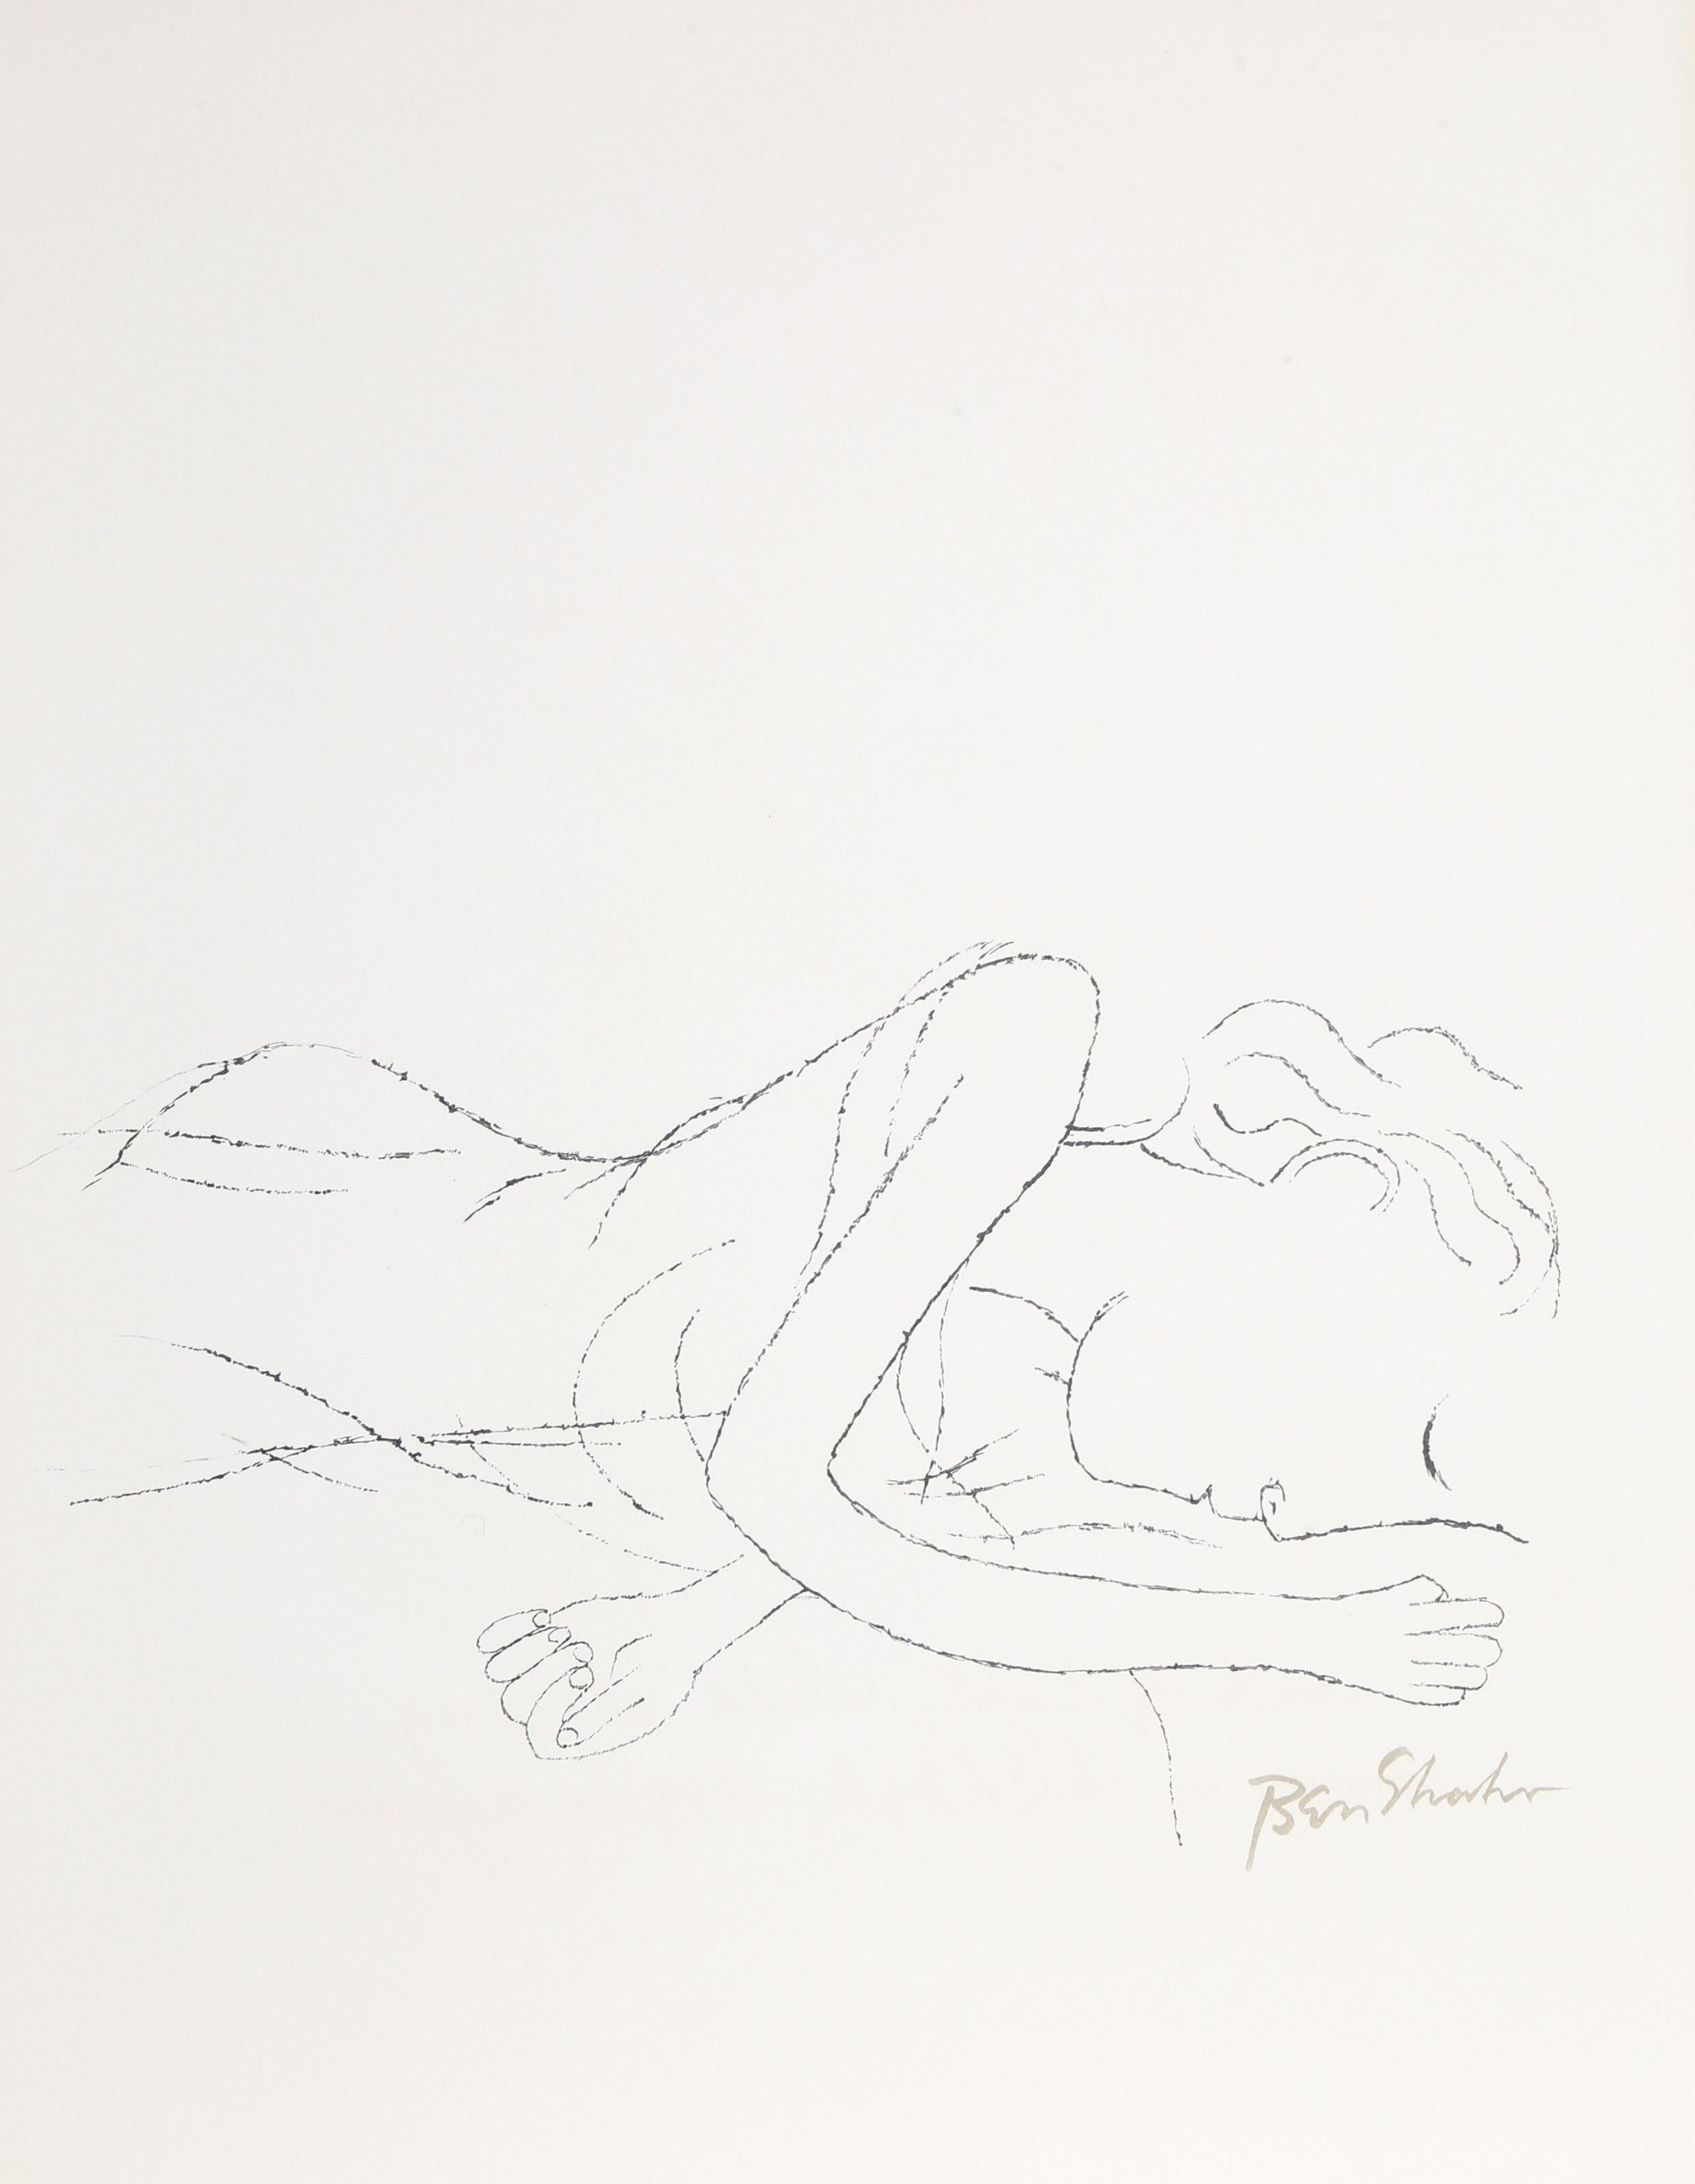 Artist: Ben Shahn, American (1898 - 1969)
Title: Of Light, White Sleeping Women in Childbed from the Rilke Portfolio
Year: 1968
Medium: Lithograph on Arches, signed in the plate
Edition: 750
Size: 22.5 x 17.75 in. (57.15 x 45.09 cm)

Printer: